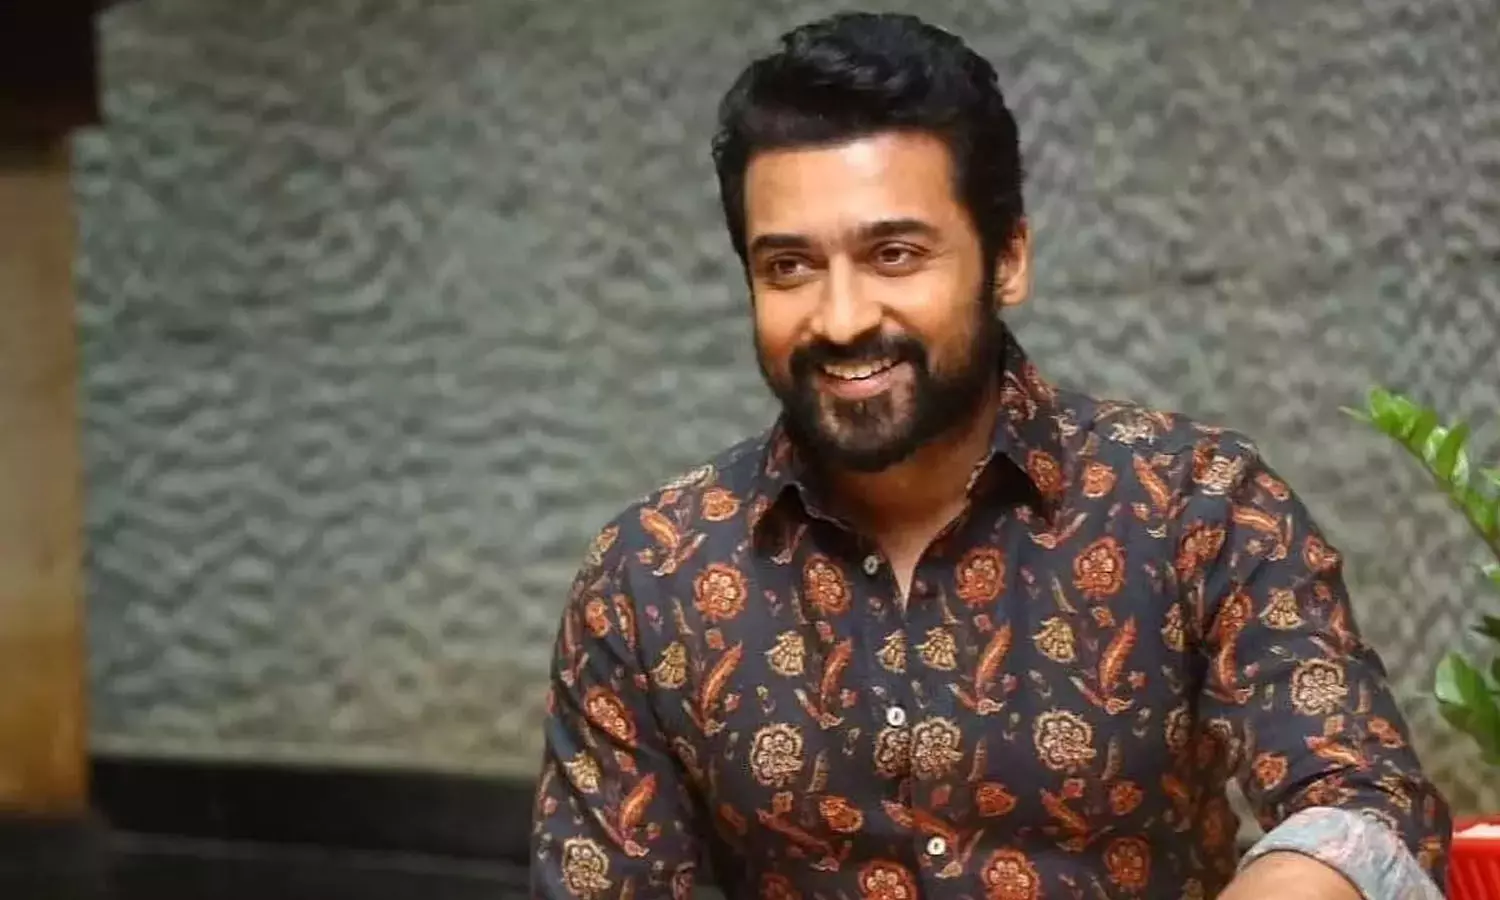 Amidst speculations, Suriya Sets the Record Straight About Mumbai Visits and Family